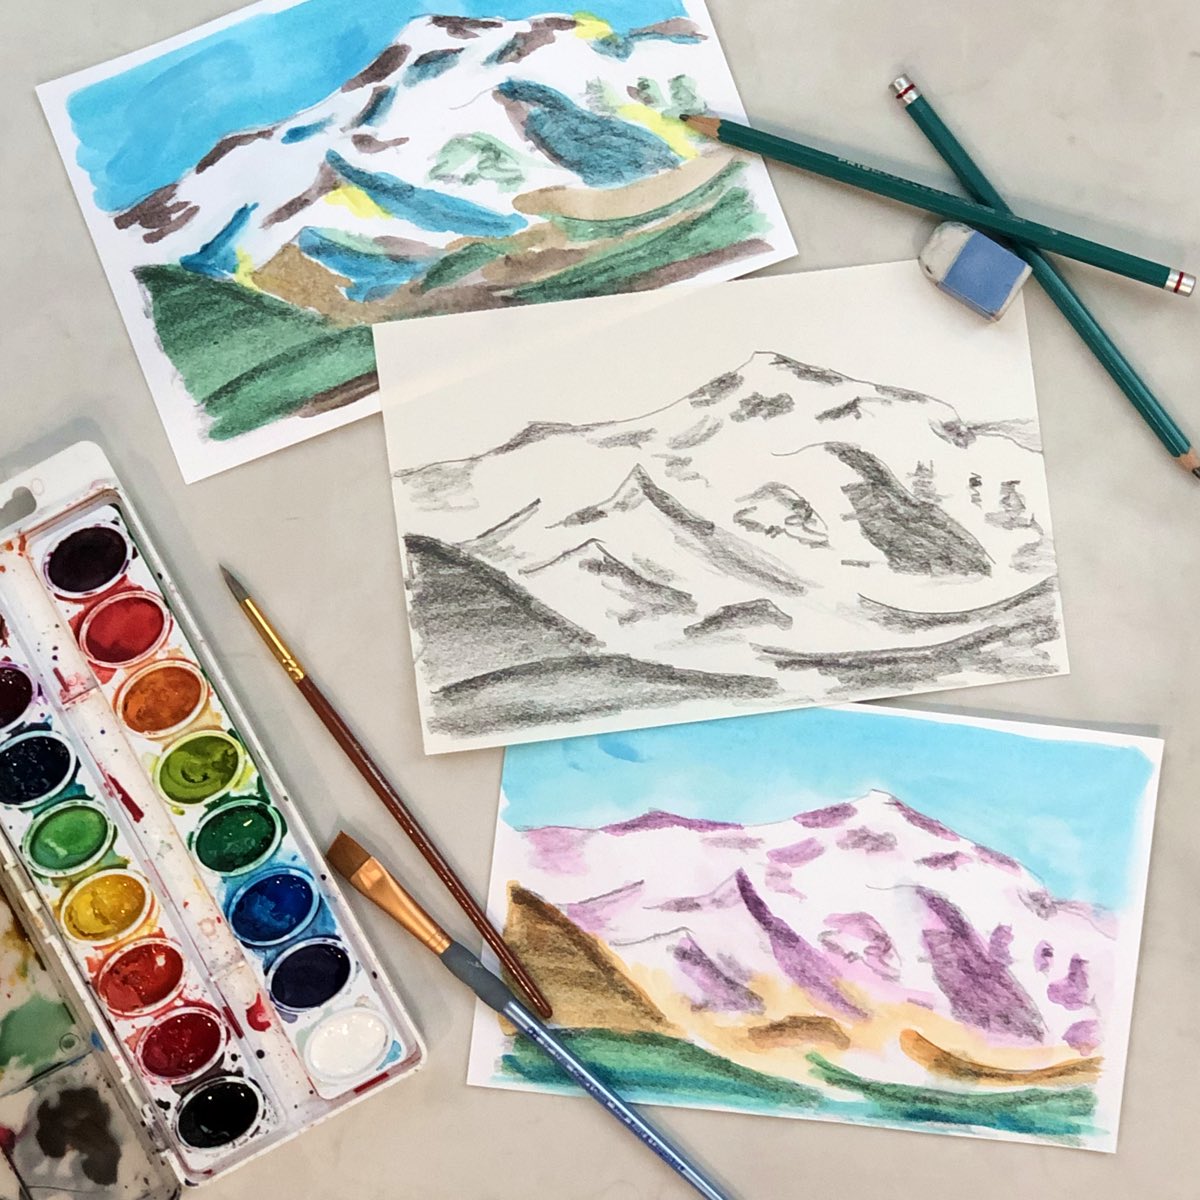 Pencil drawing and watercolor painting of mountain landscape with drawing pencils paint brushes and paint set.